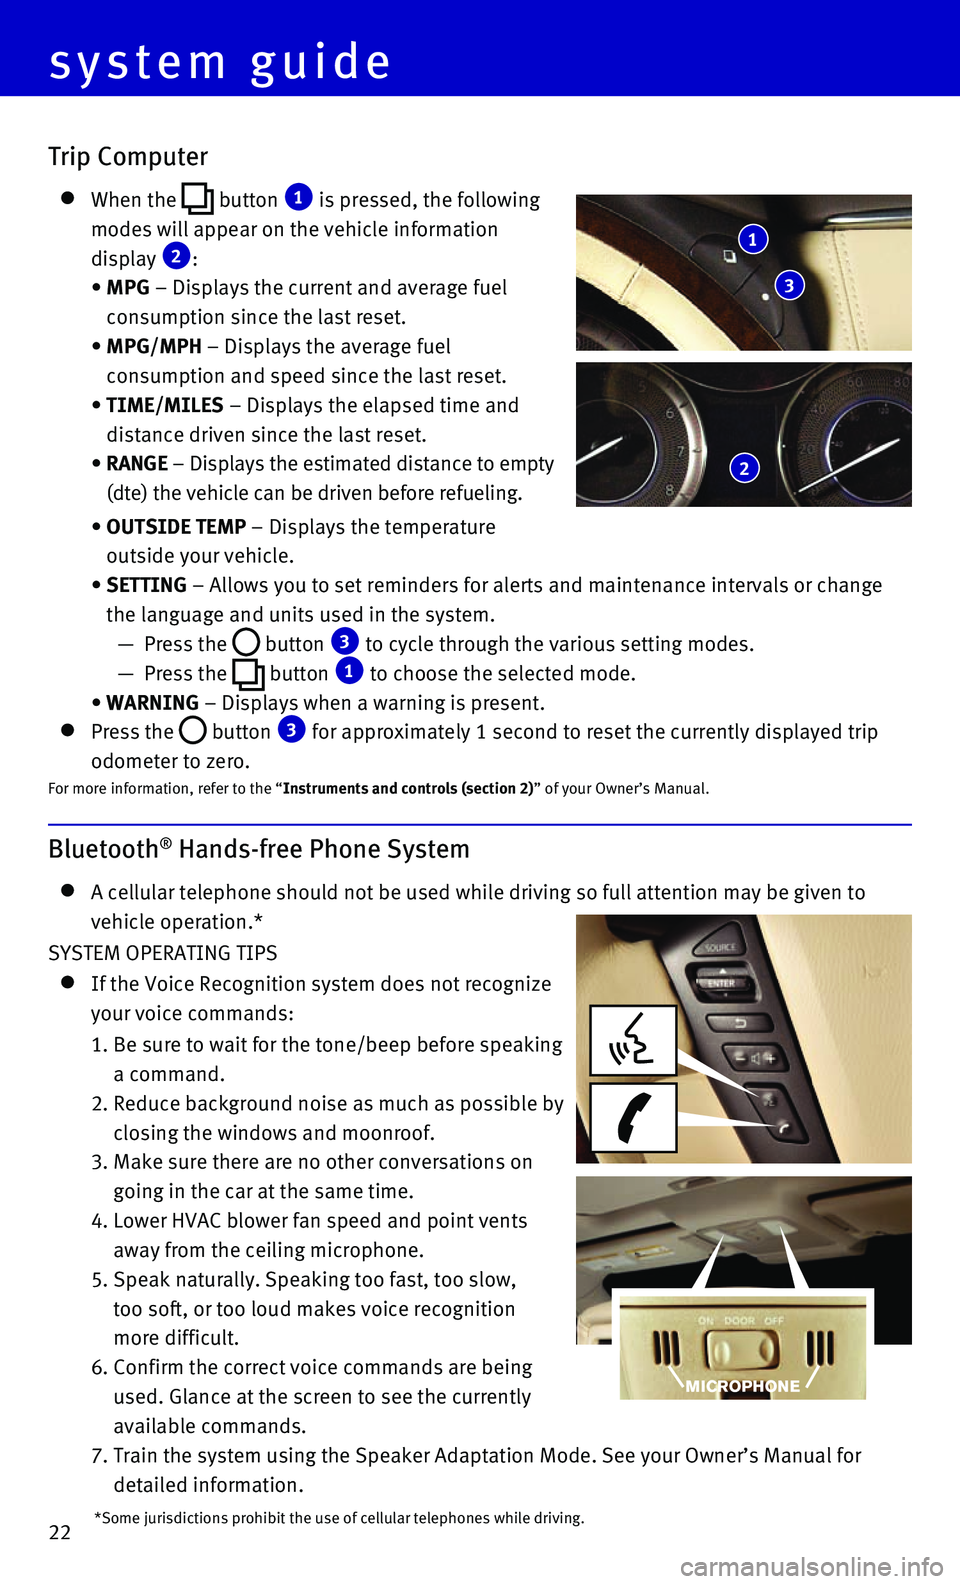 INFINITI QX80 2016  Quick Reference Guide 22
system guide
Bluetooth® Hands-free Phone System
    A cellular telephone should not be used while driving so full attention \
may be given to 
vehicle operation.*
SYSTEM OPERATING TIPS
    If the 